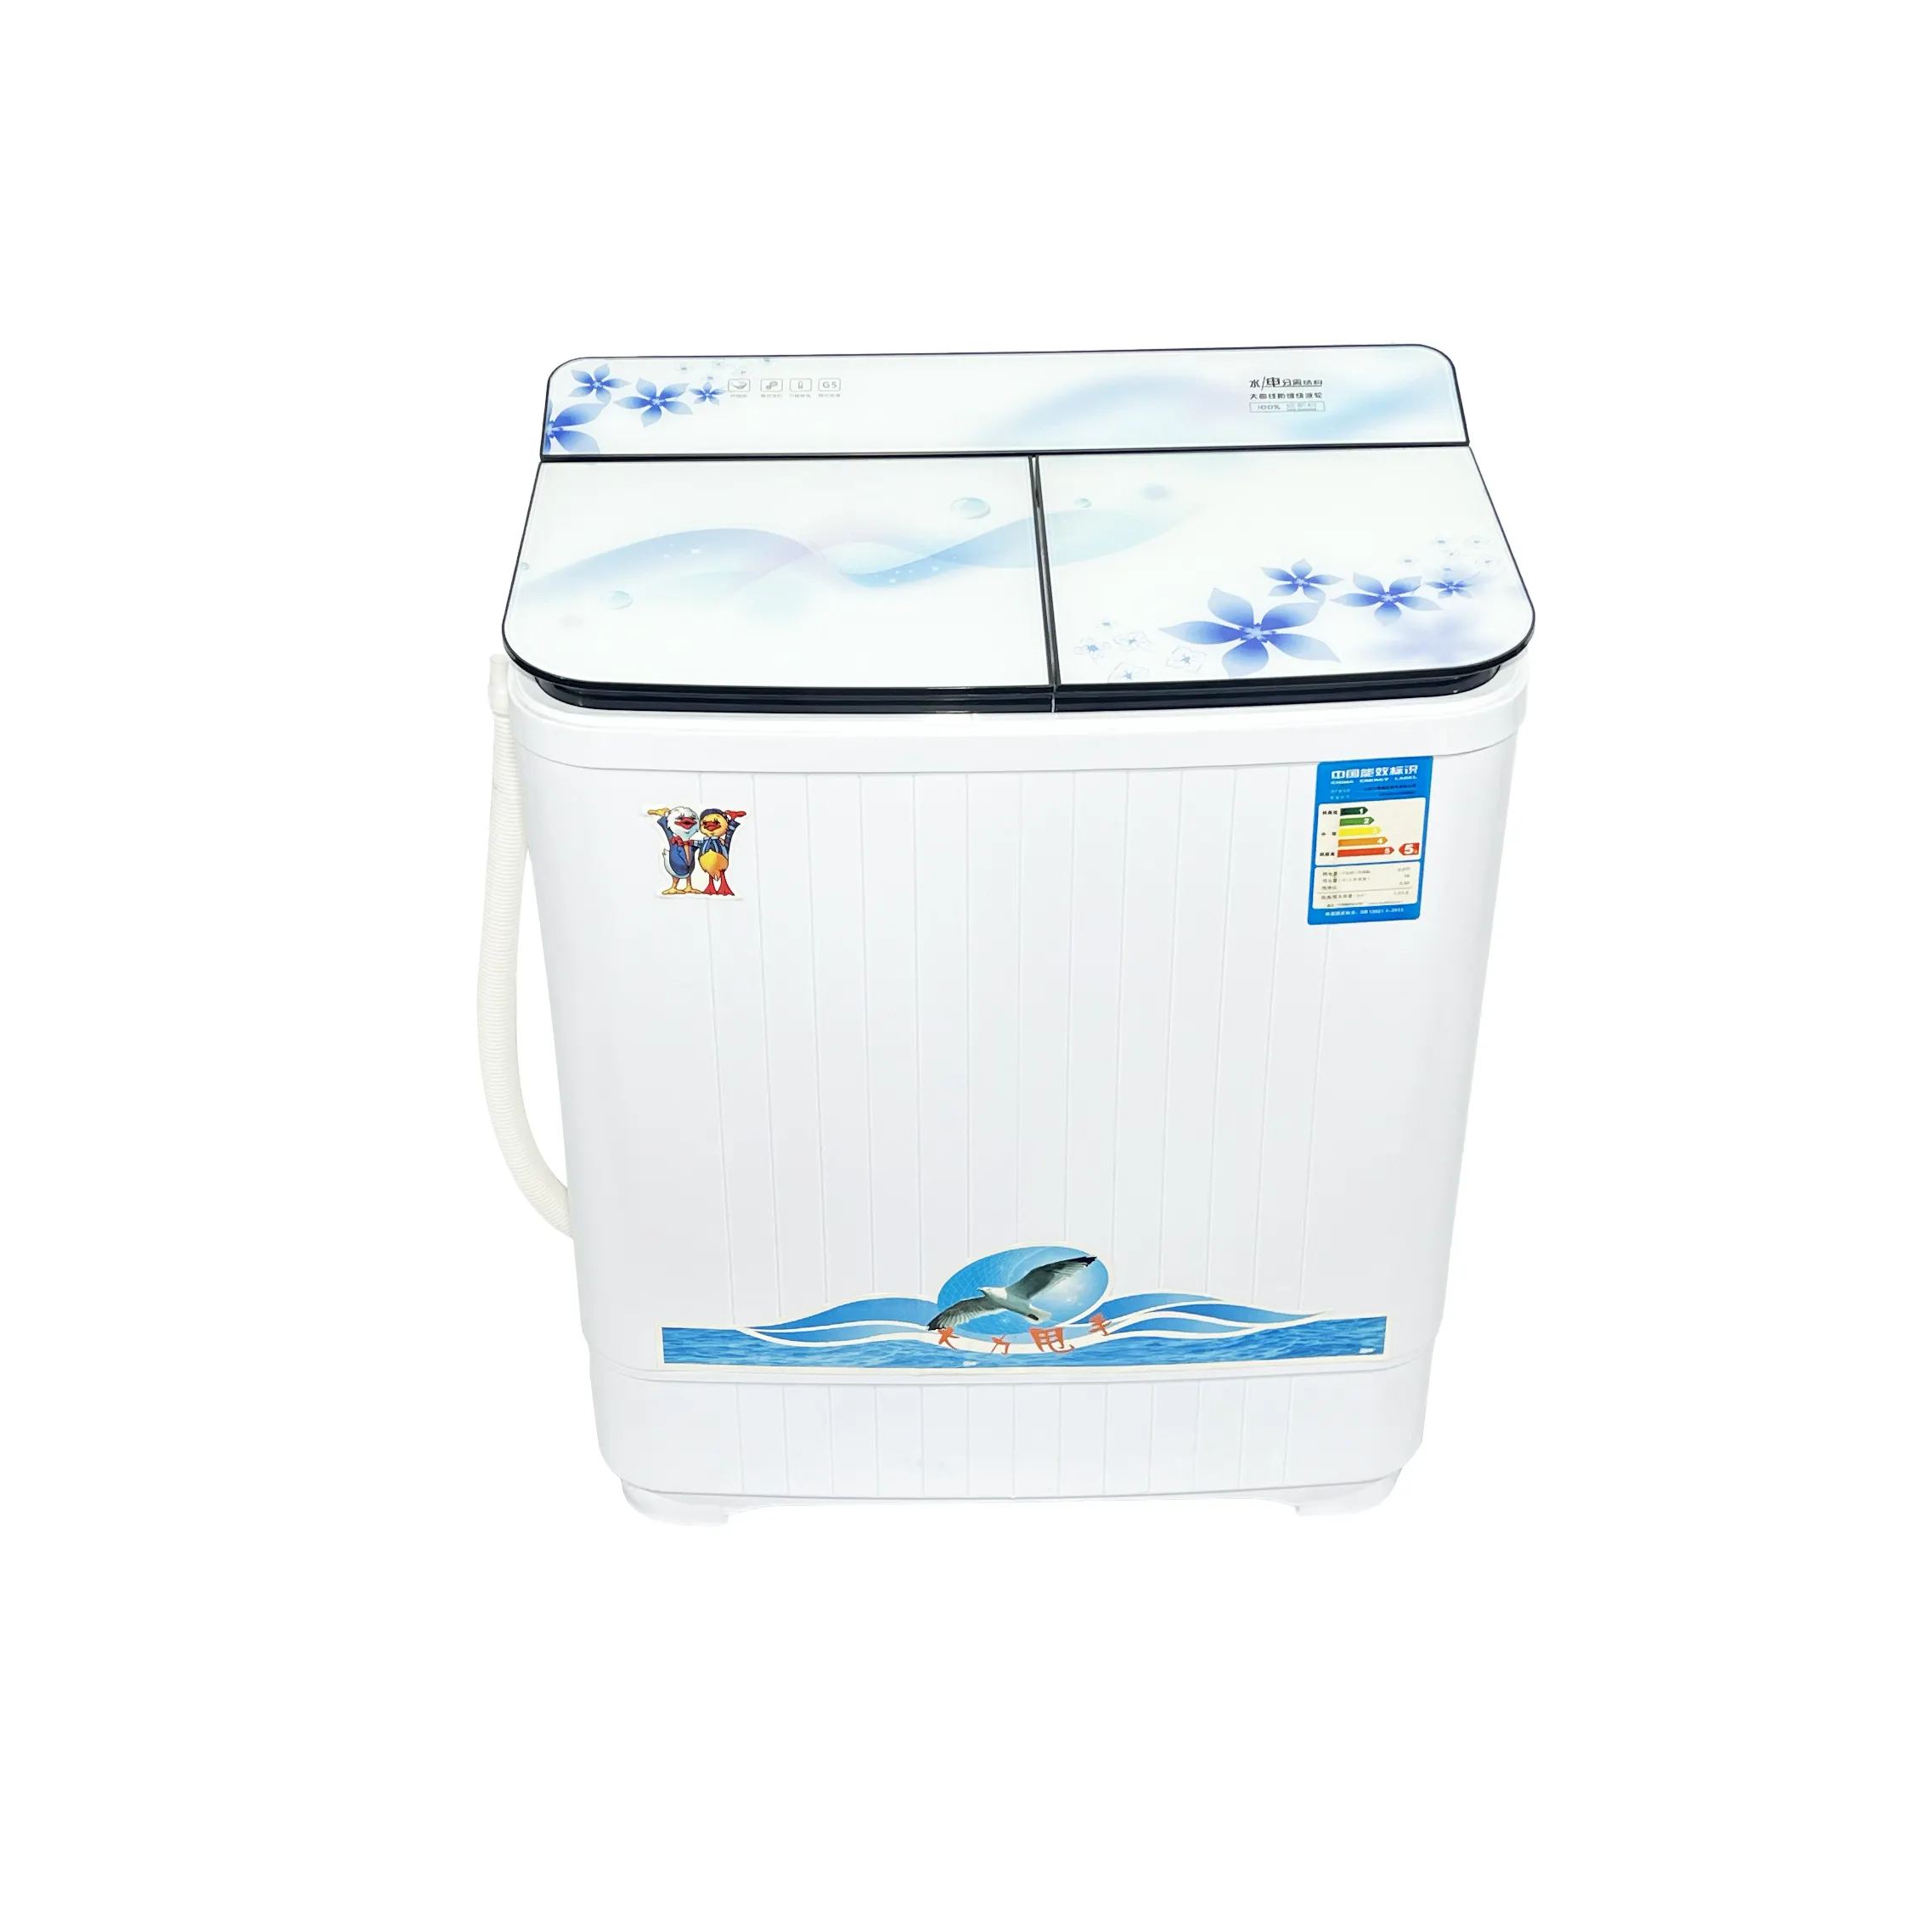 7kg Brand New Top Load Double Tub Laundry Appliances Disconnect Type Electric Washing Machine